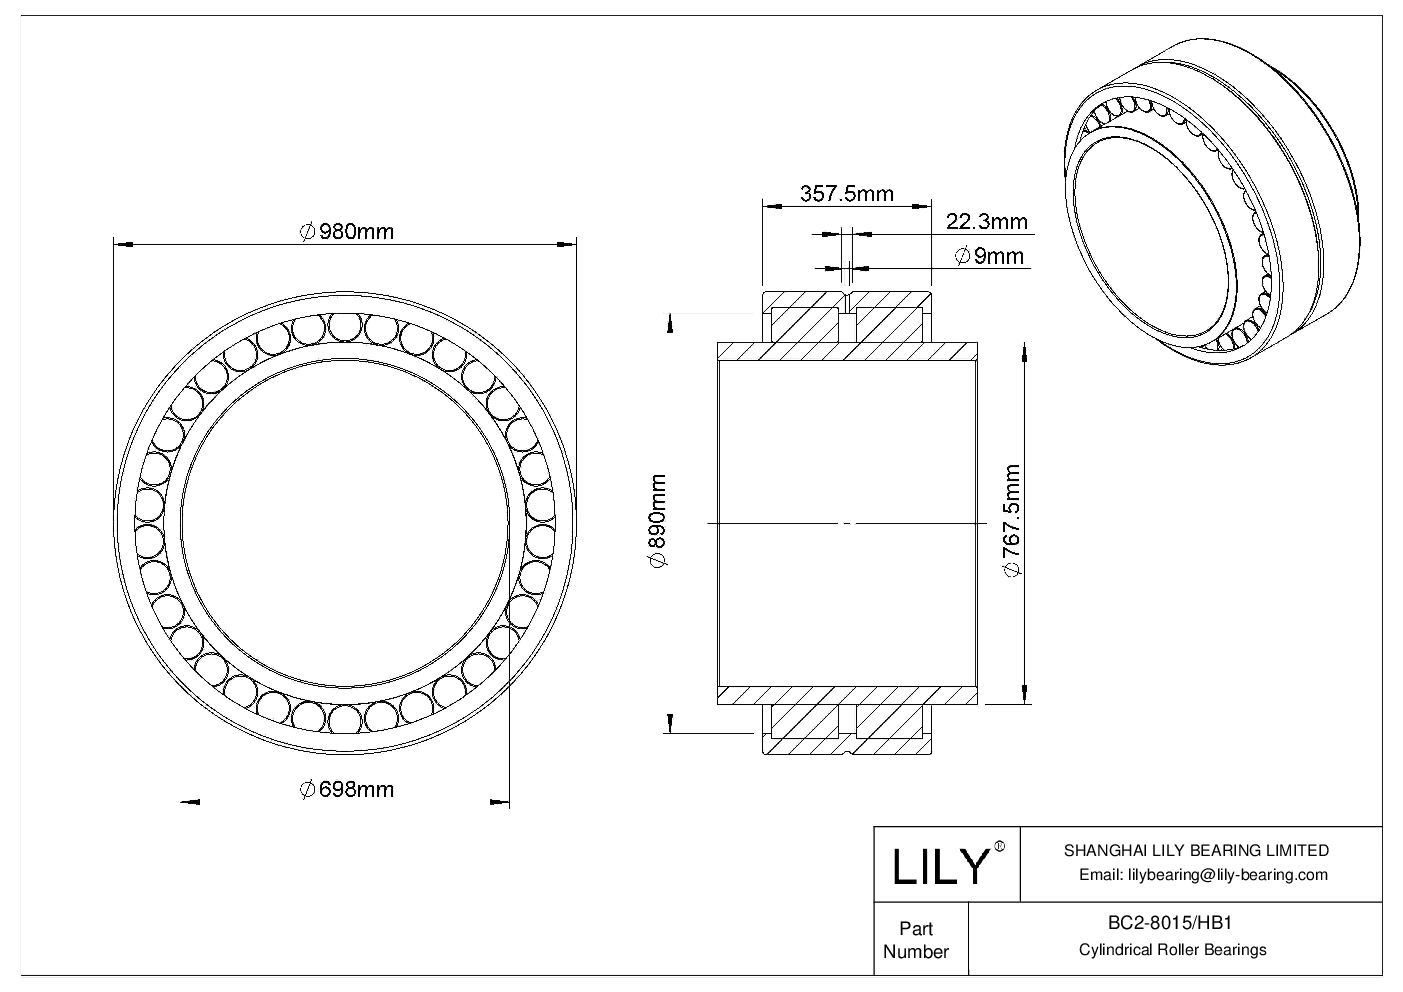 BC2-8015/HB1 Double Row Cylindrical Roller Bearings cad drawing